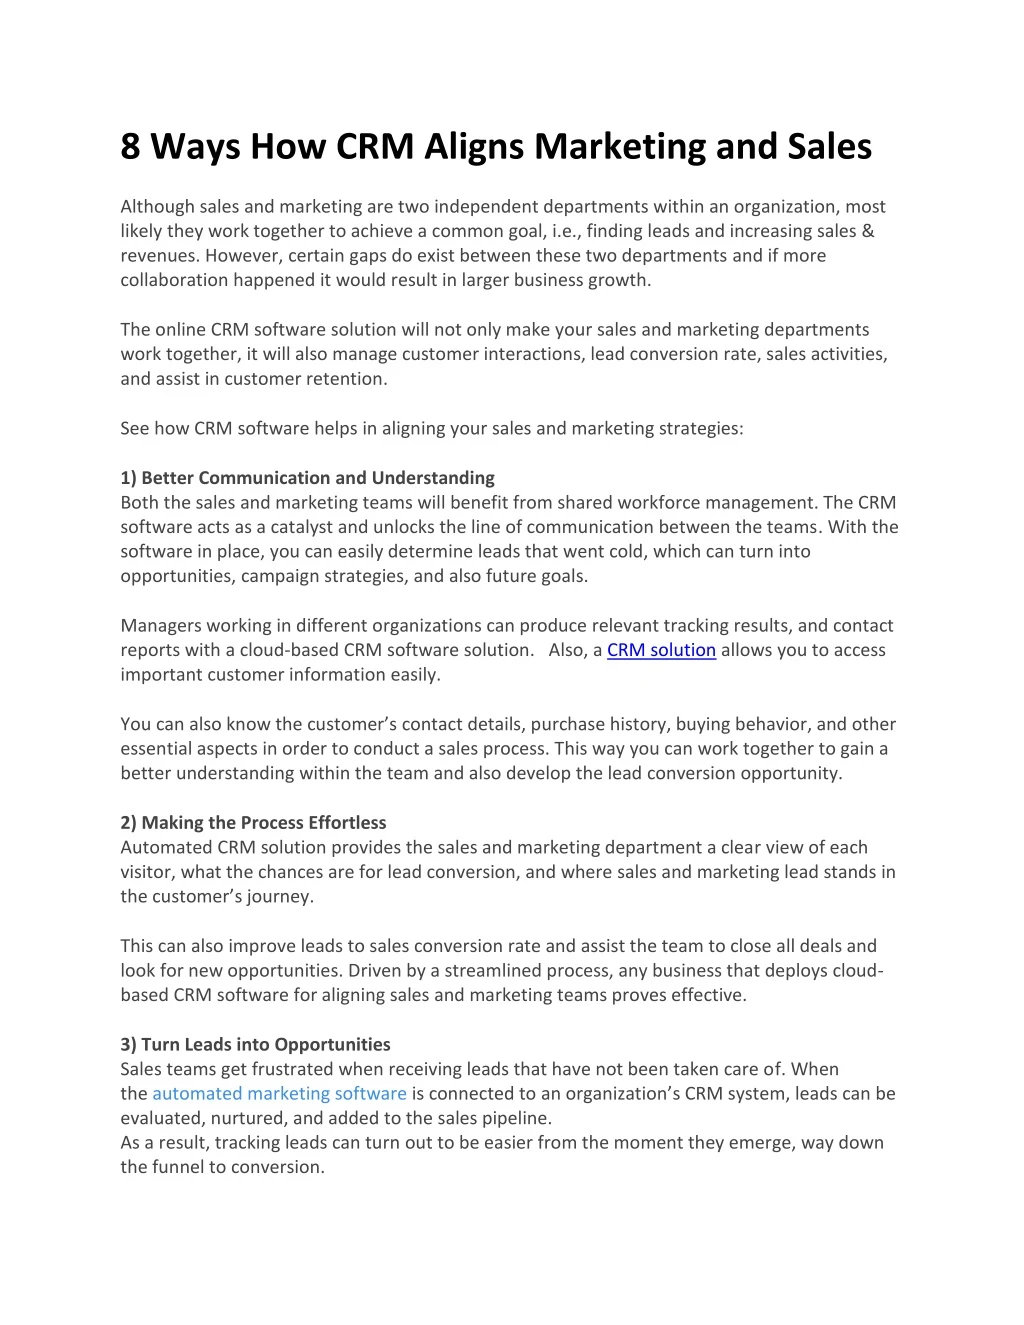 8 ways how crm aligns marketing and sales